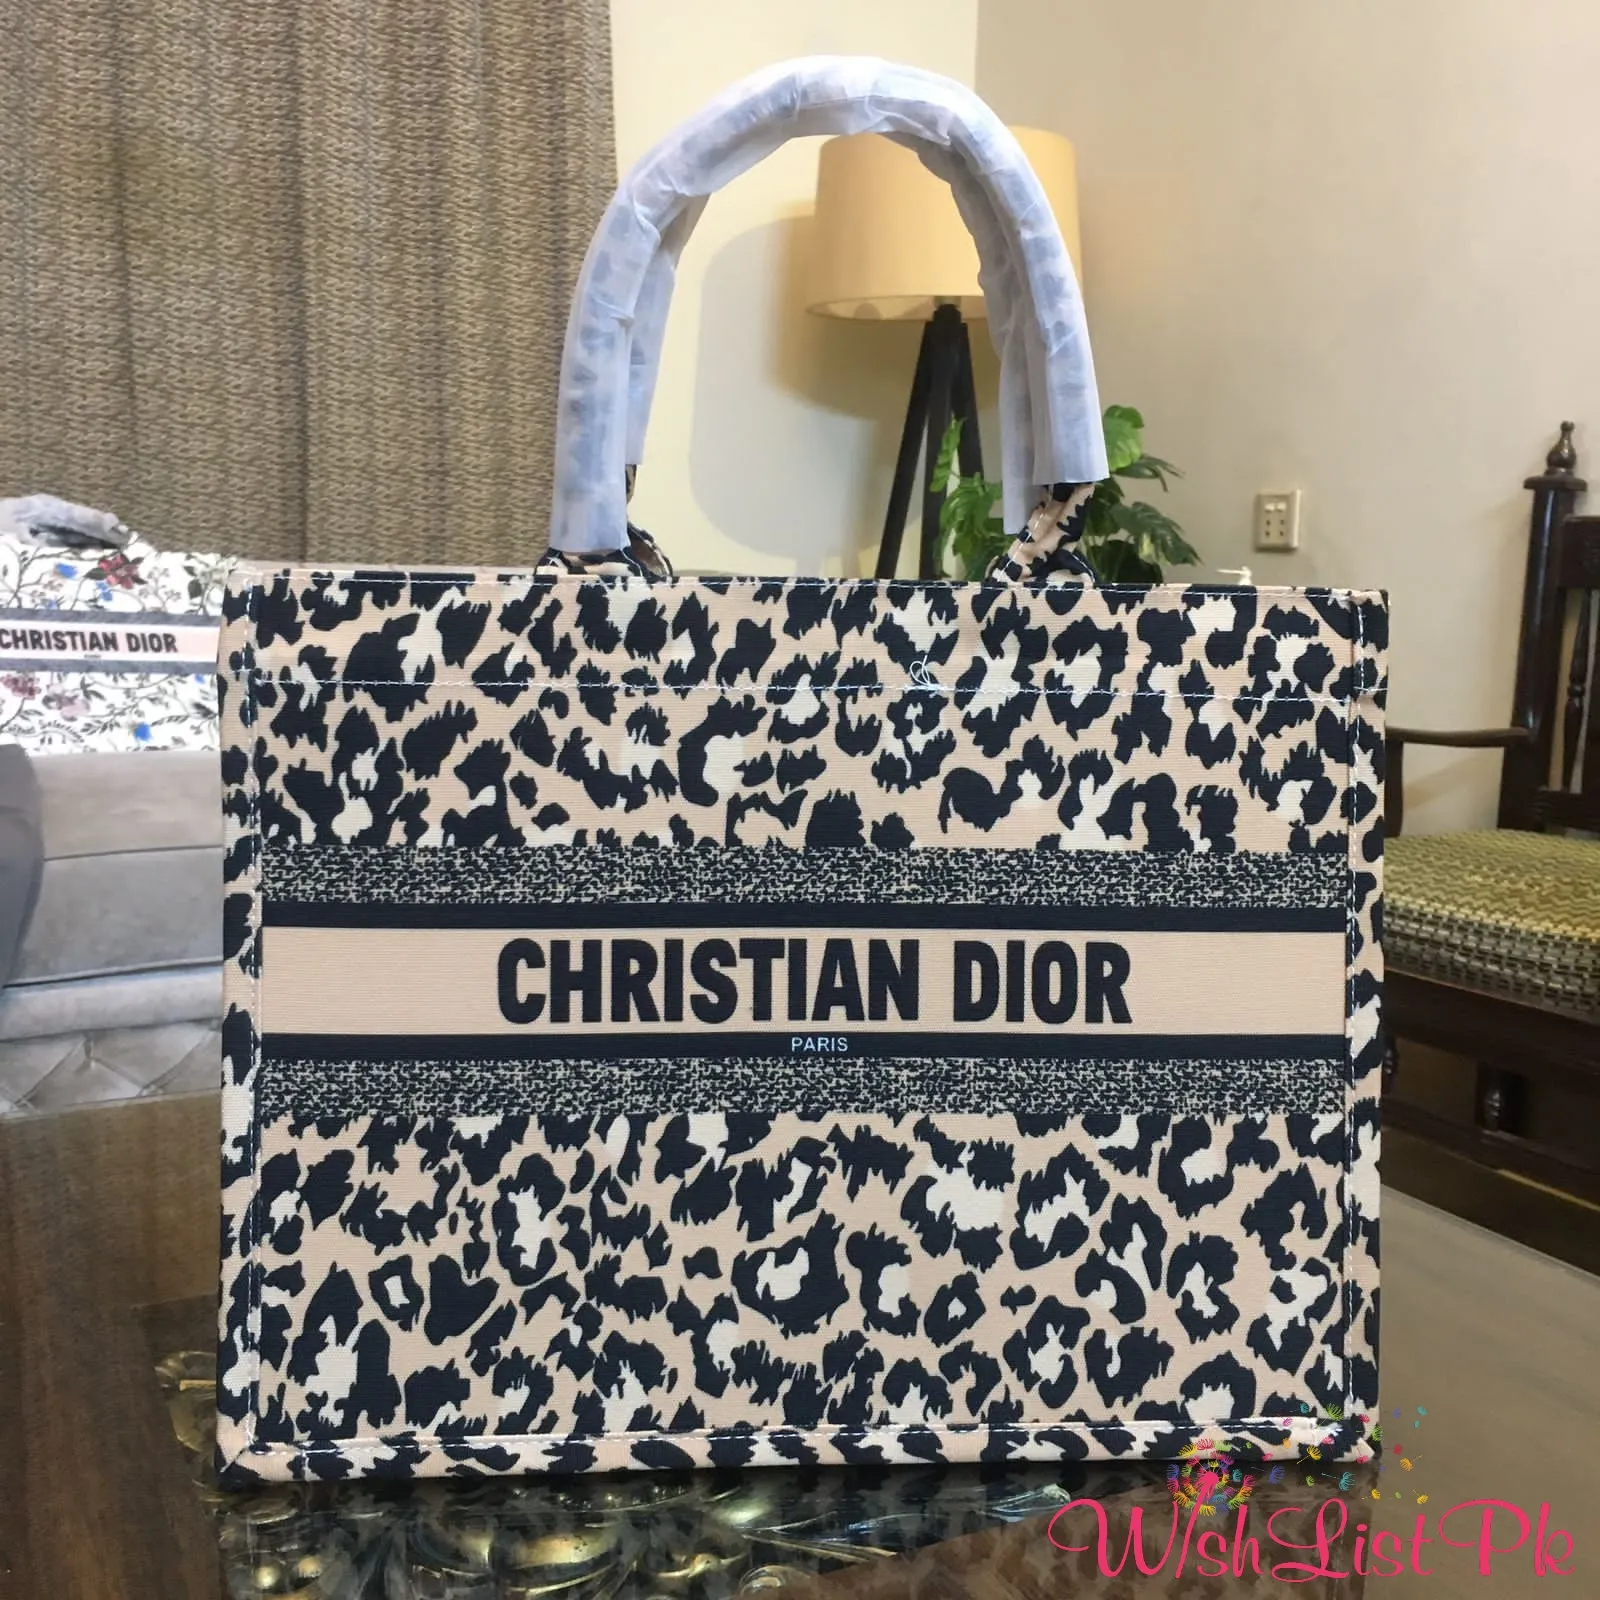 Dior Tote Leopard Print Bag Best Price In Pakistan | Rs 7500 | find the  best quality of Handbags,hand Bag, Hand Bags, Ladies Bags, Side Bags,  Clutches, Leather Bags, Purse, Fashion Bags,